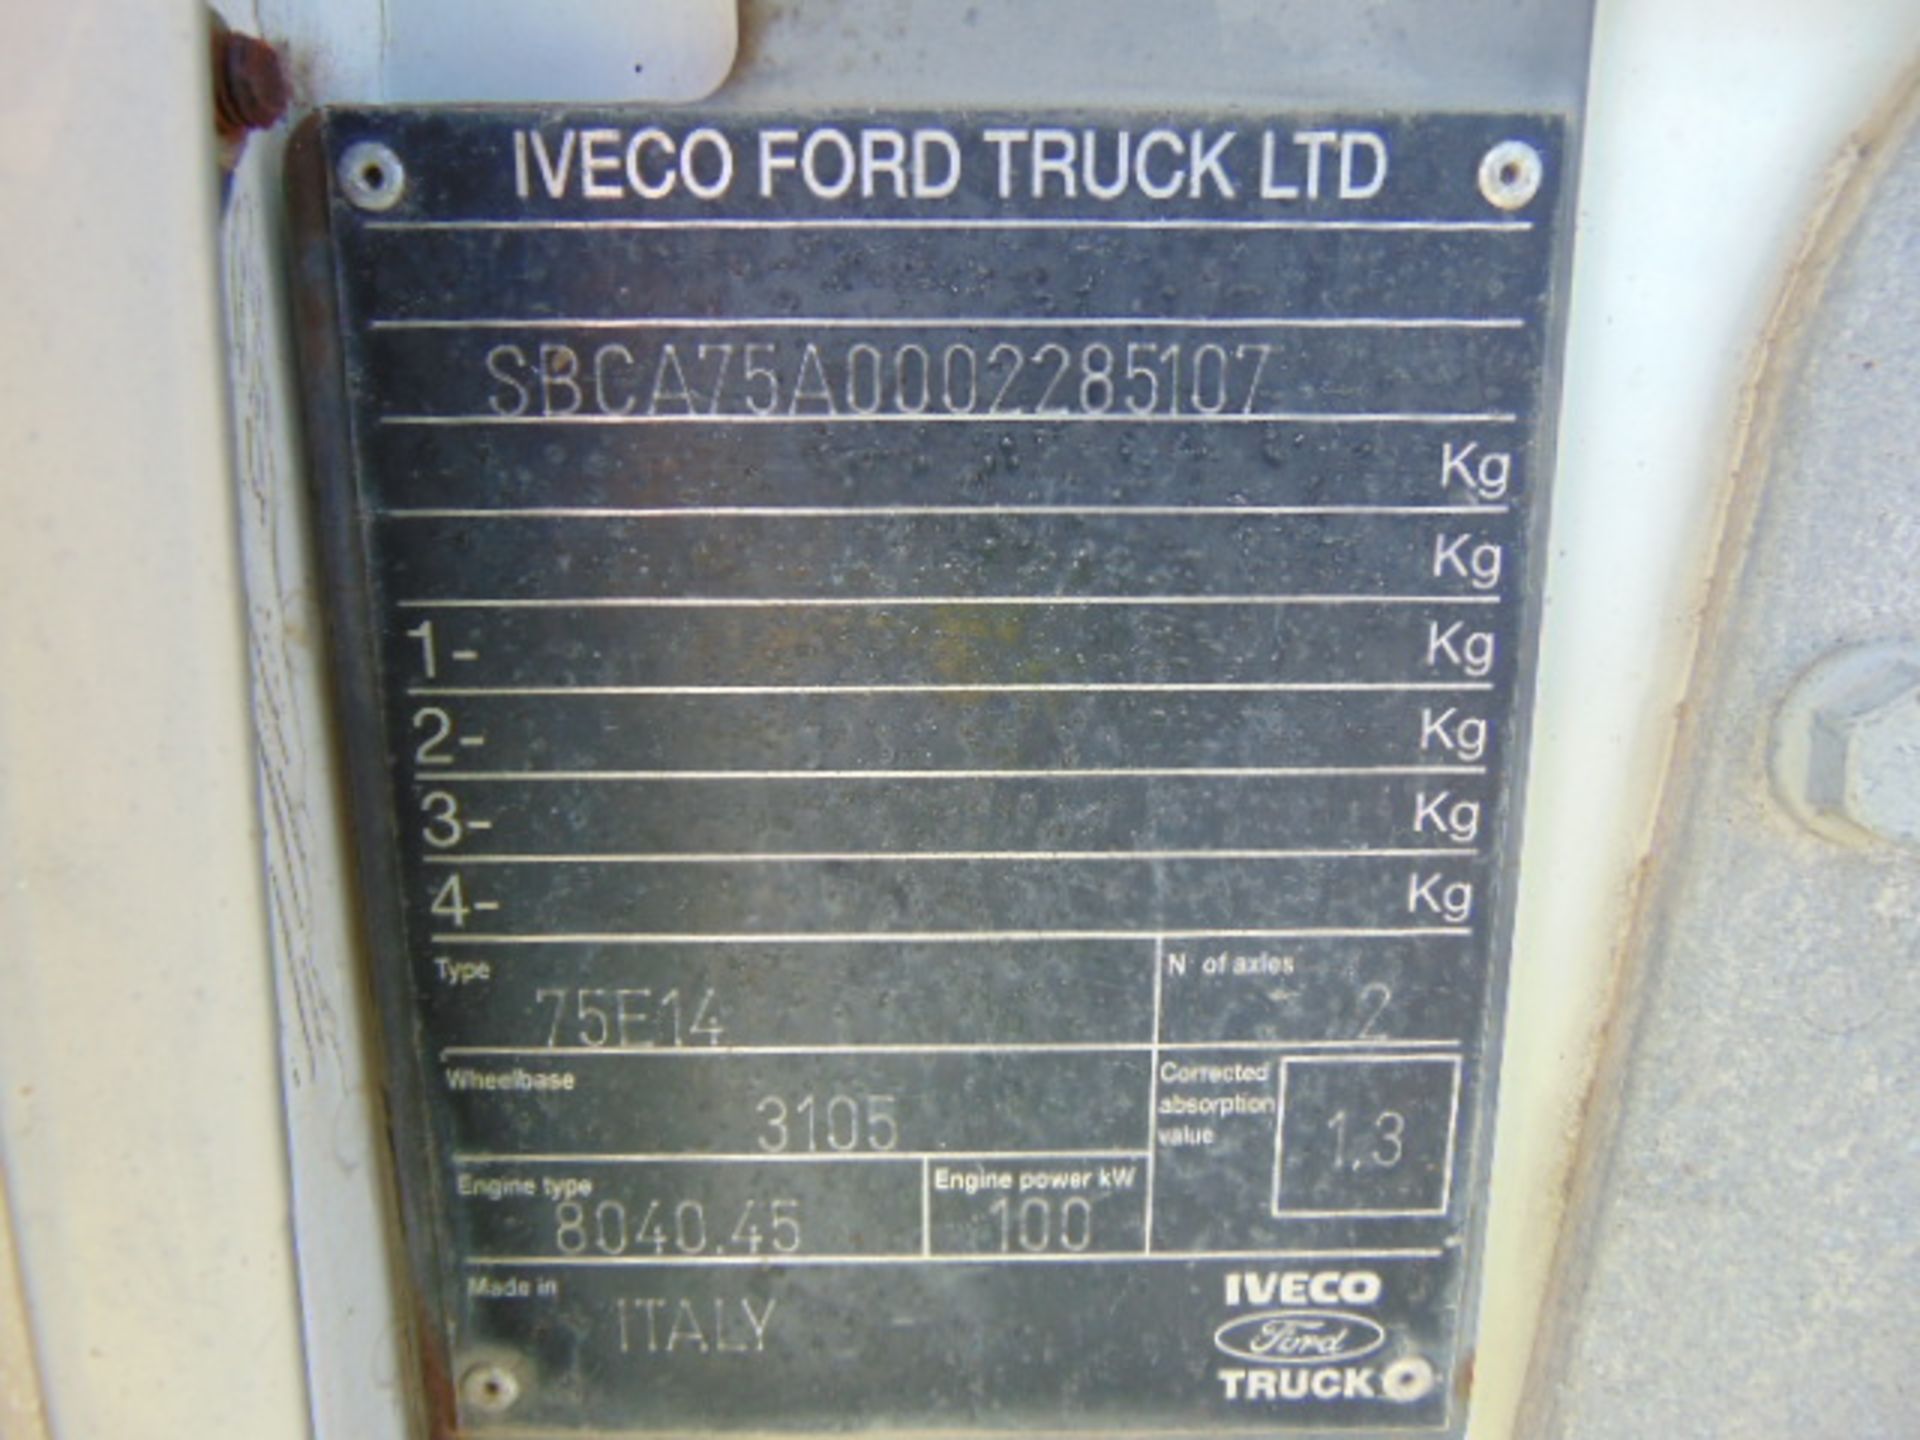 Ford Iveco Cargo 75E14 Complete with Rear Tail Lift - Image 20 of 20